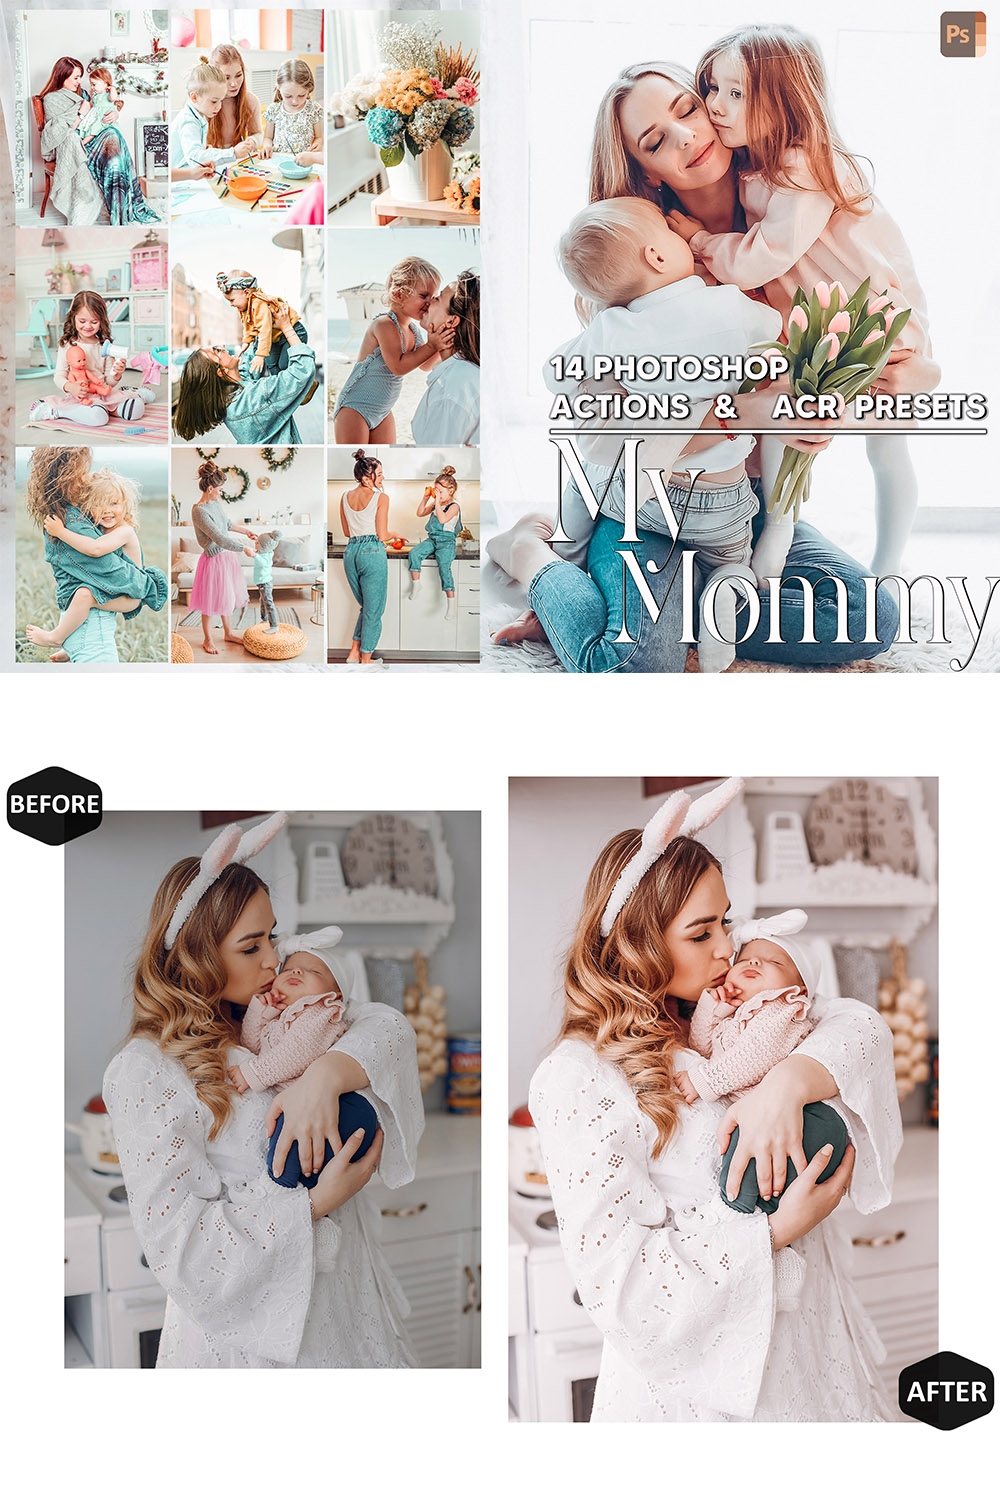 14 Photoshop Actions, My Mommy Ps Action, Light ACR Preset, Pastel Ps Filter, Atn Pictures And style Theme For Instagram, Blogger pinterest preview image.